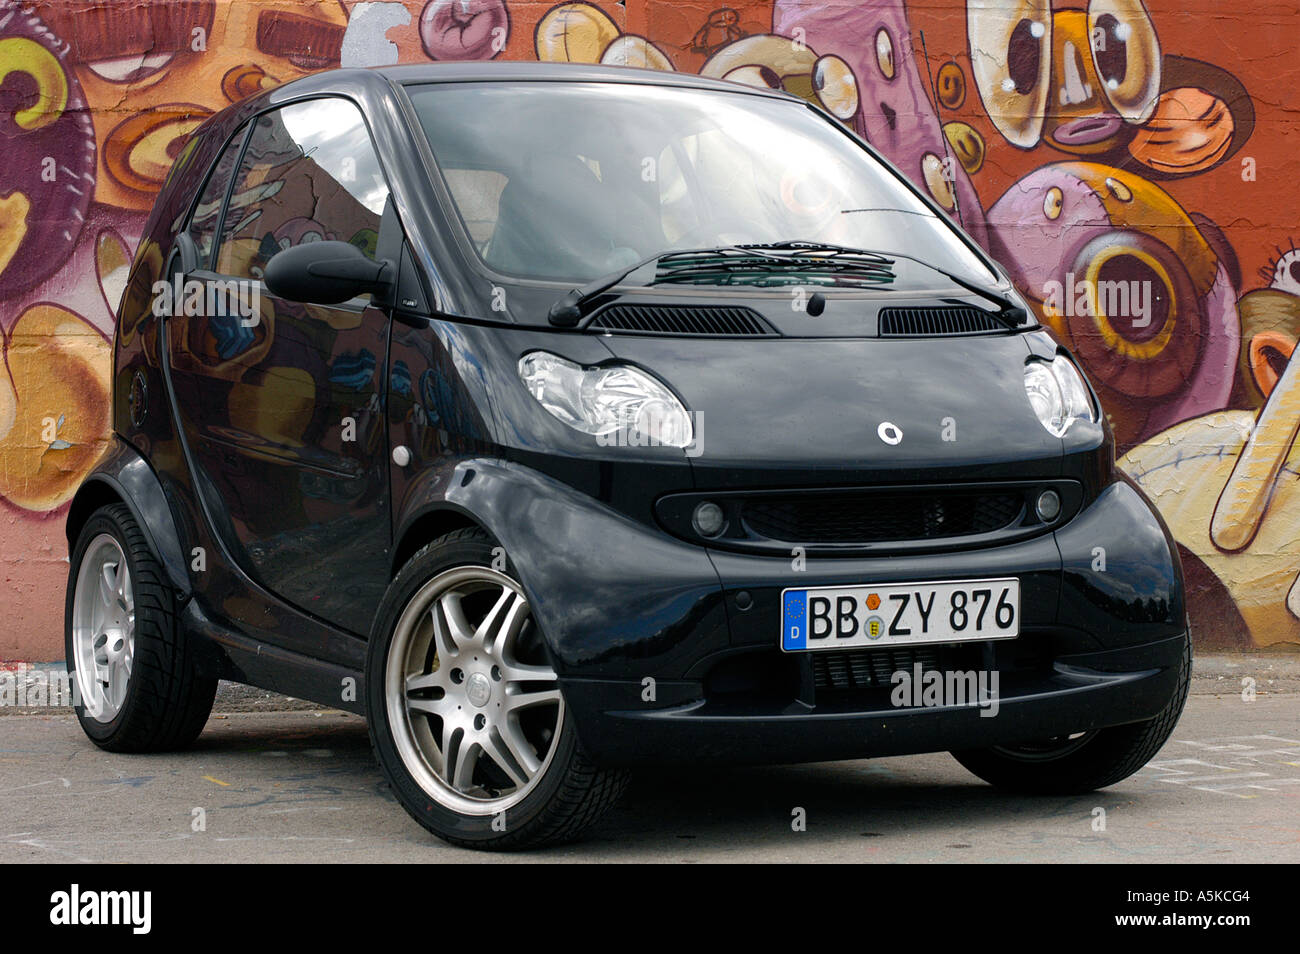 Smart ForTwo Cabrio (Model 450) vector drawing